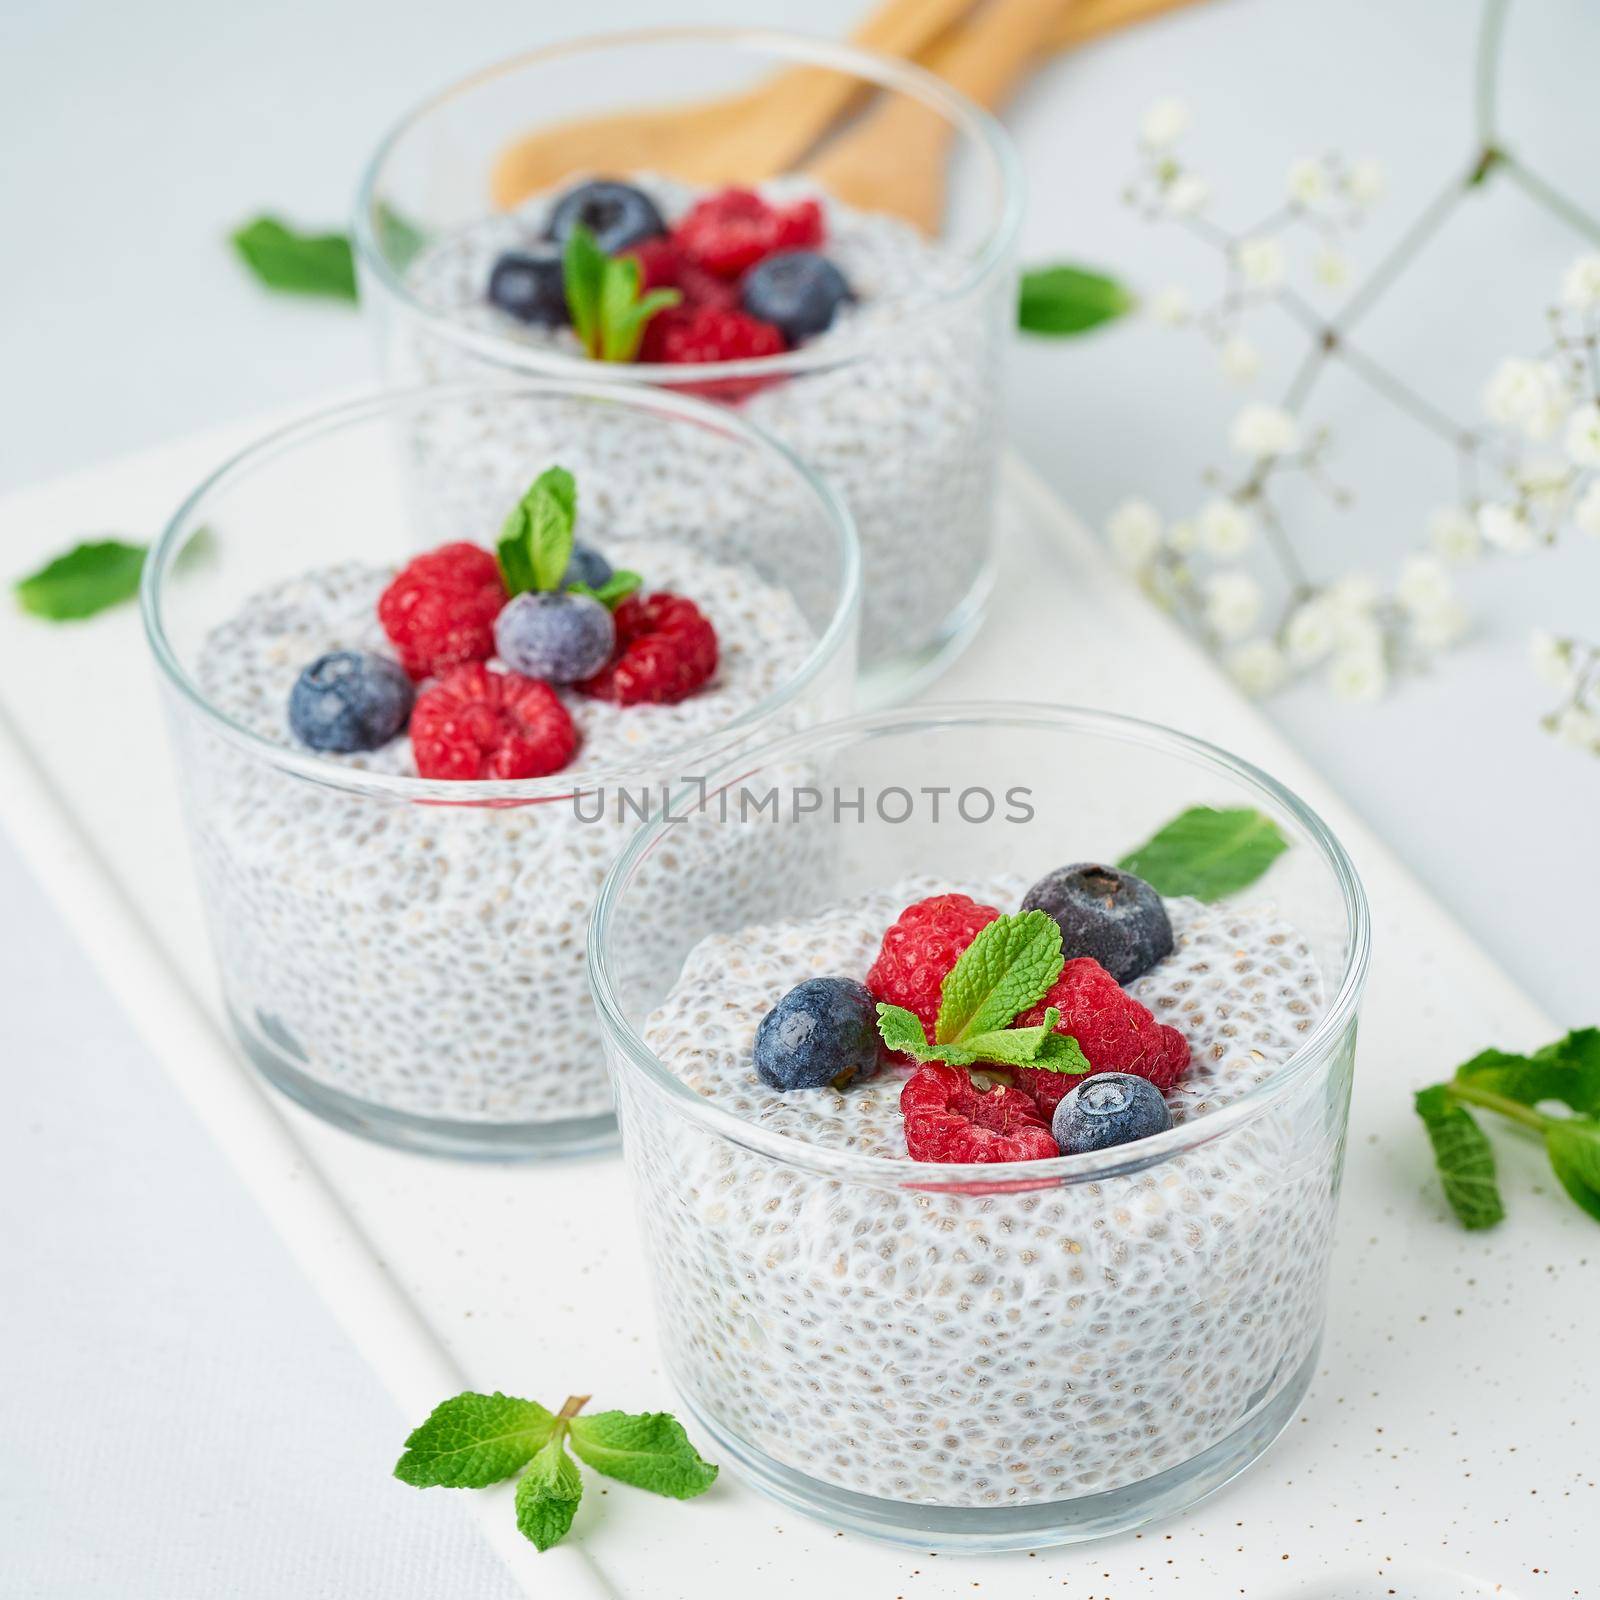 Chia pudding with fresh berries raspberries, blueberries. Three glass, light background, side view, flowers, close up. by NataBene